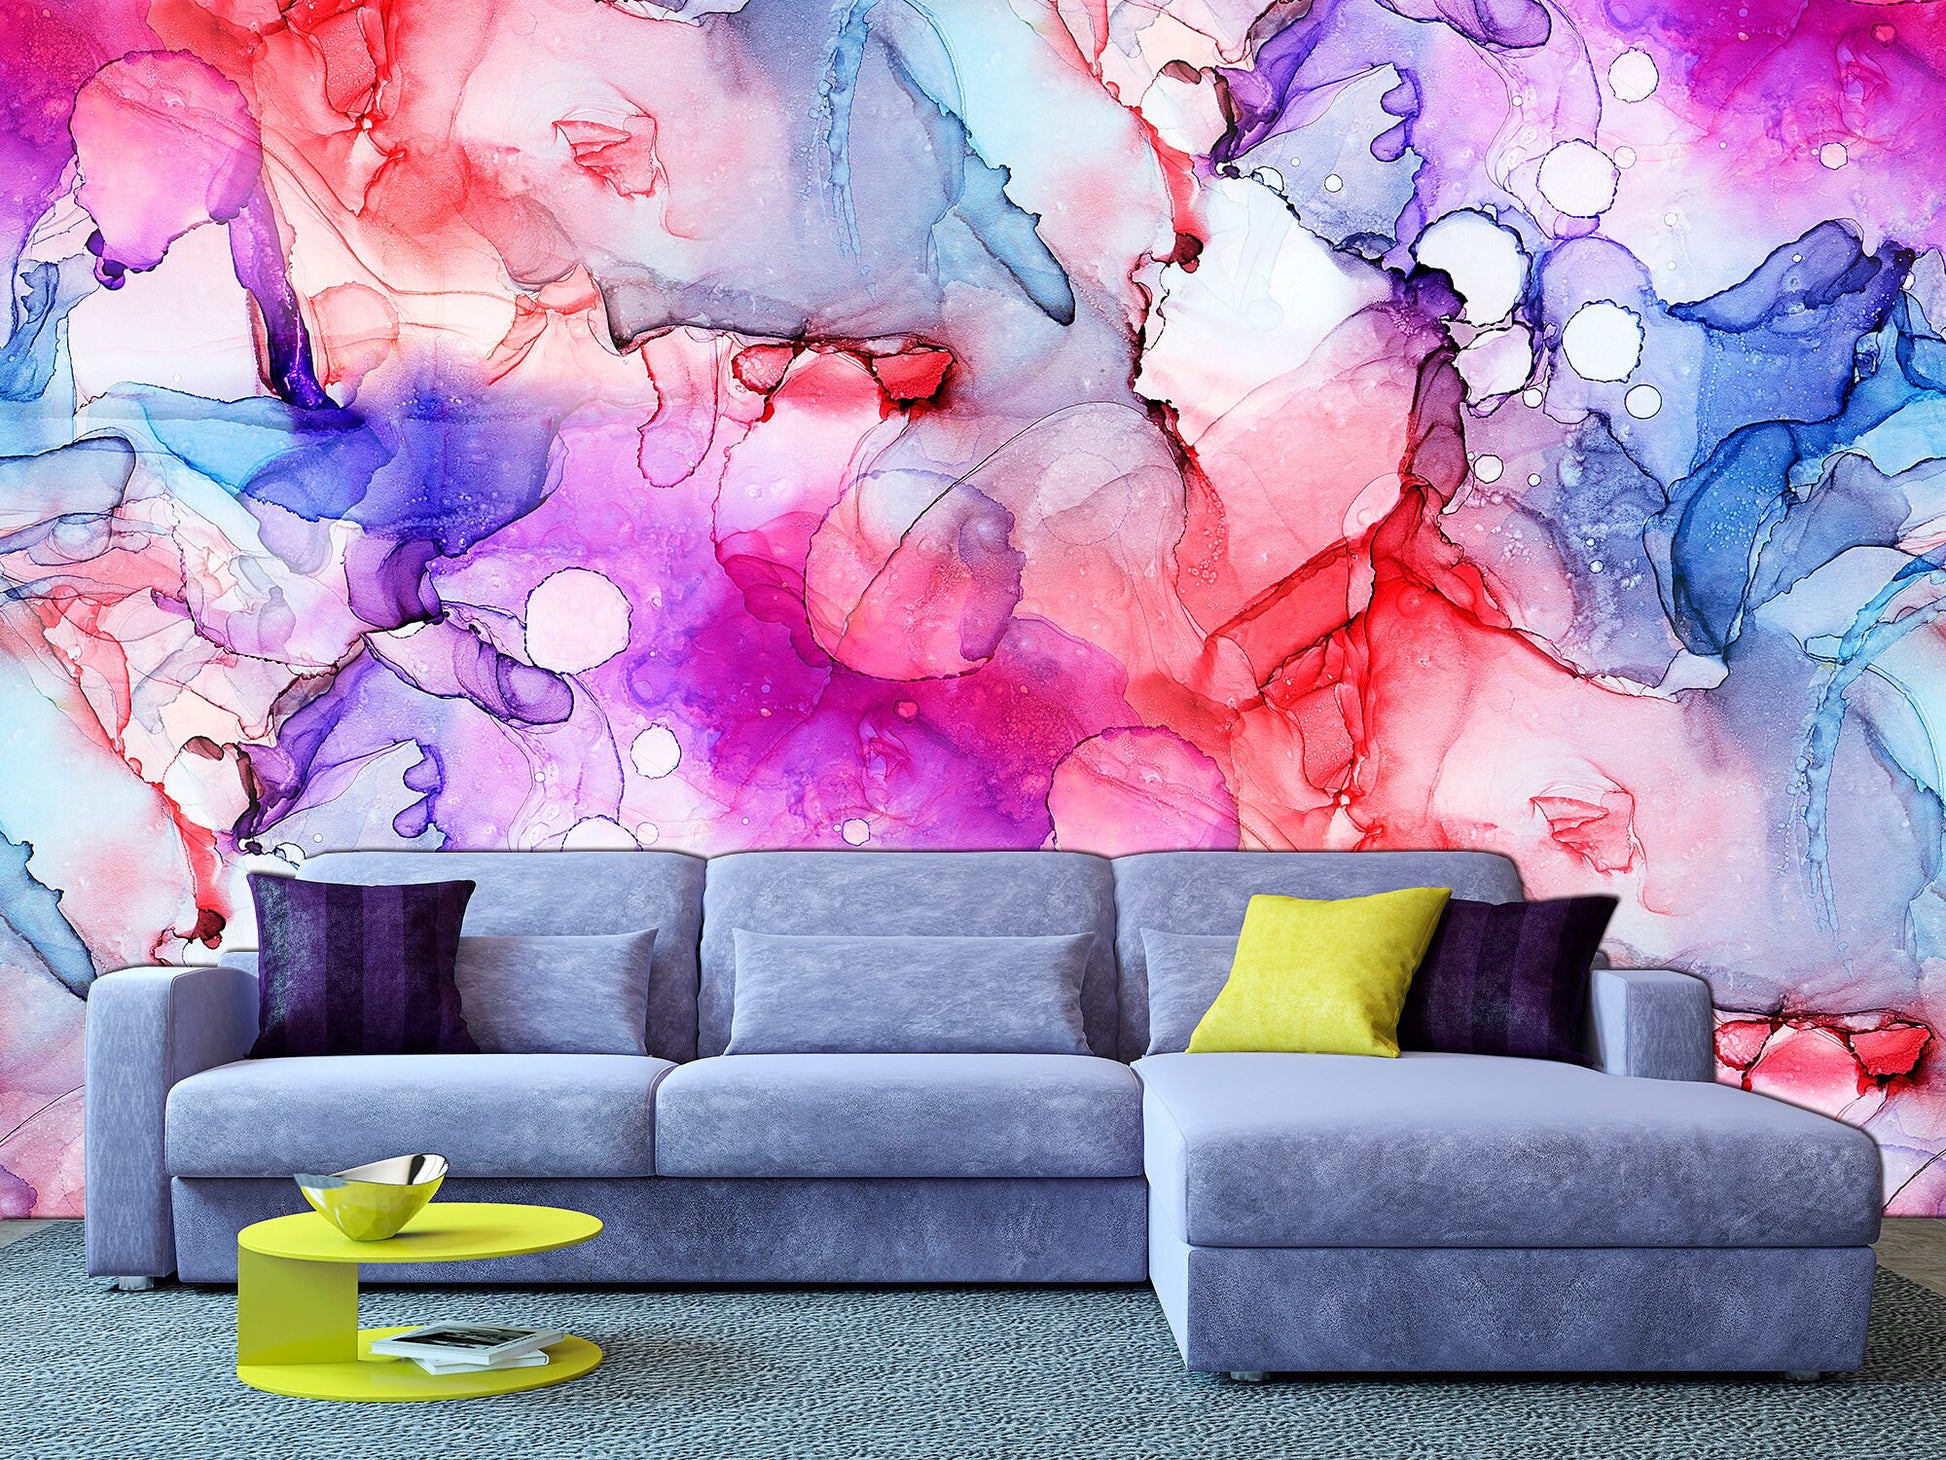 Marble wallpaper Marble wall art Colorful wallpaper, Abstract wallpaper Peel stick wallpaper Trendy wallpaper